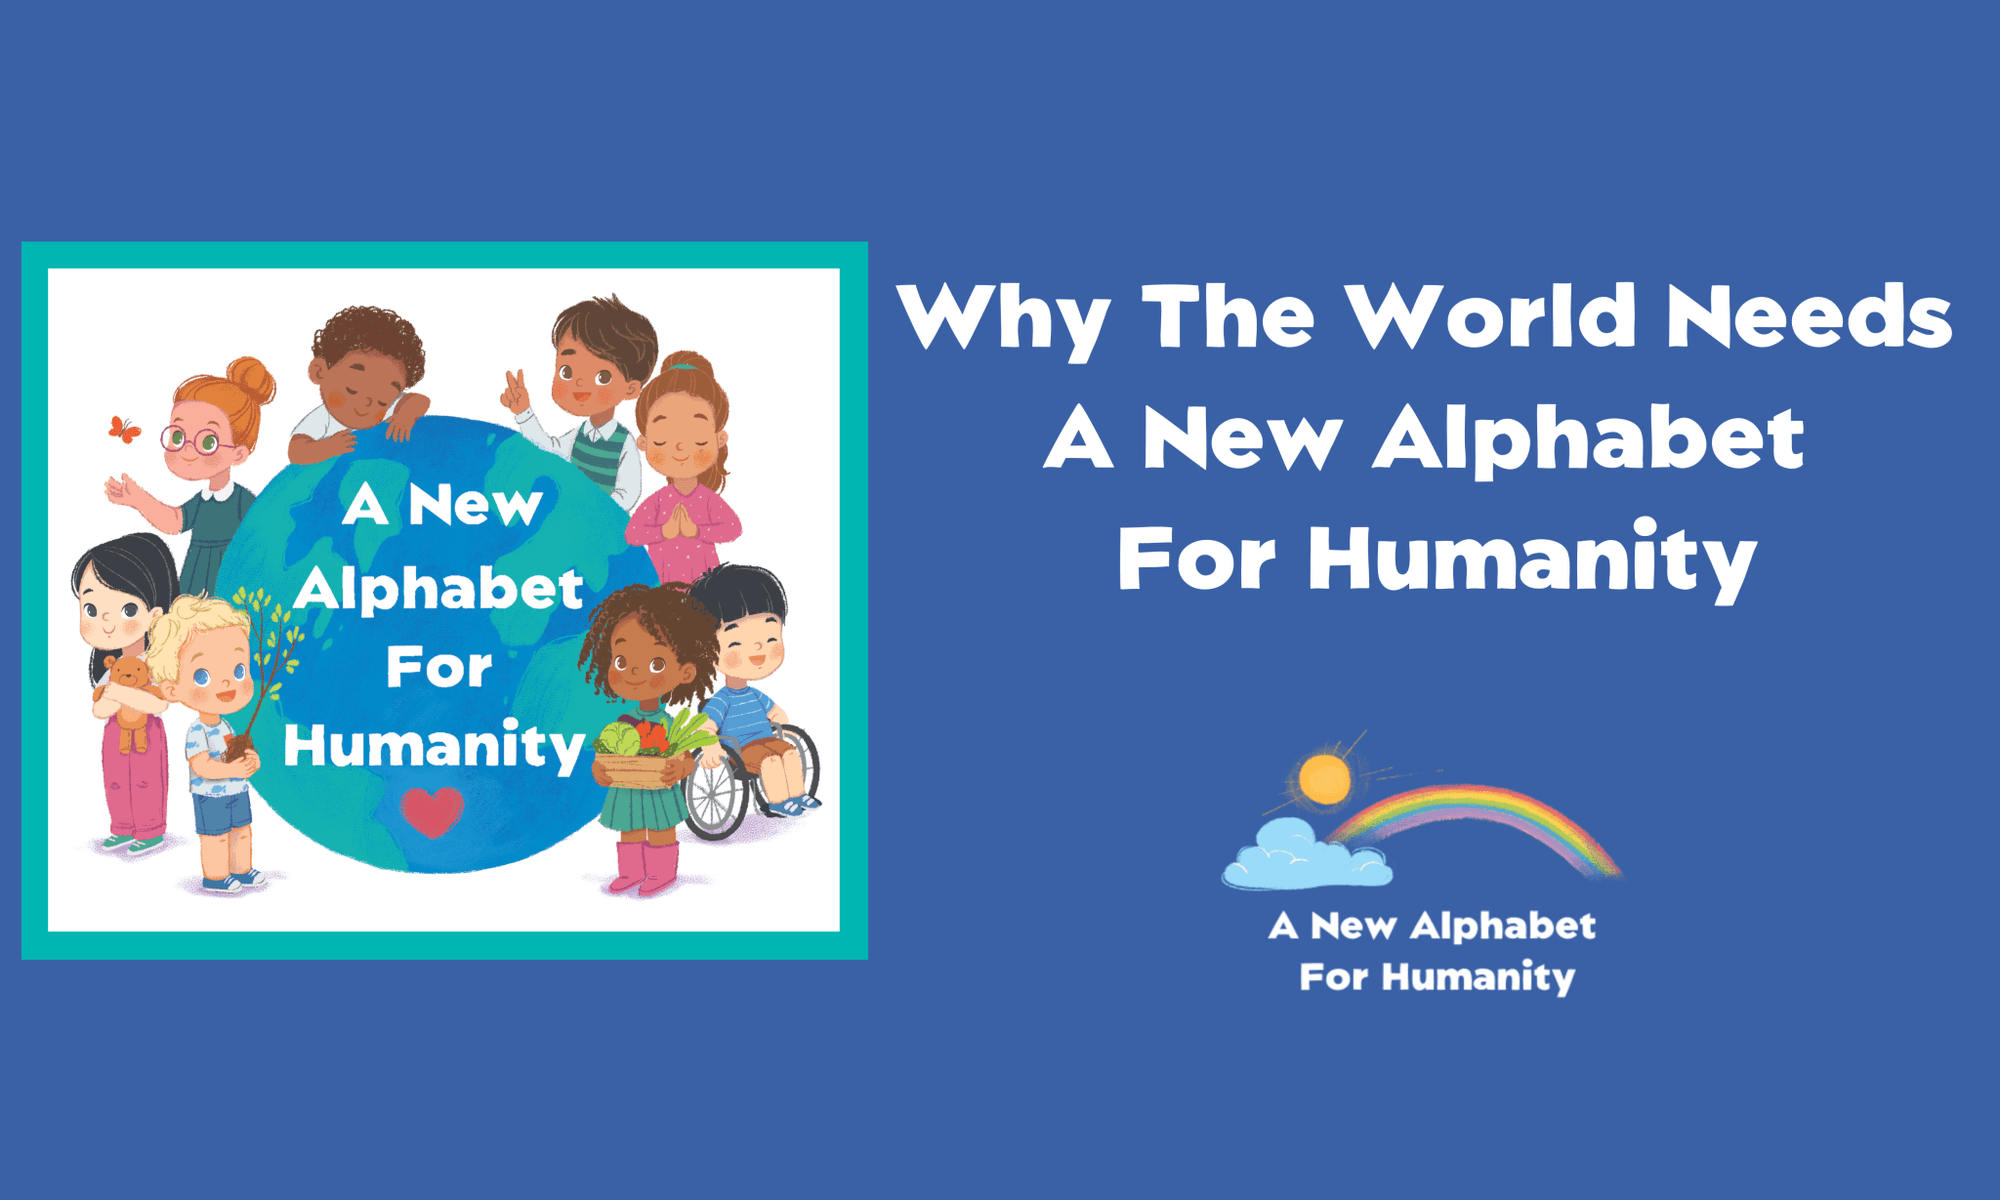 Why The World Needs A New Alphabet for Humanity | Alphabet For Humanity